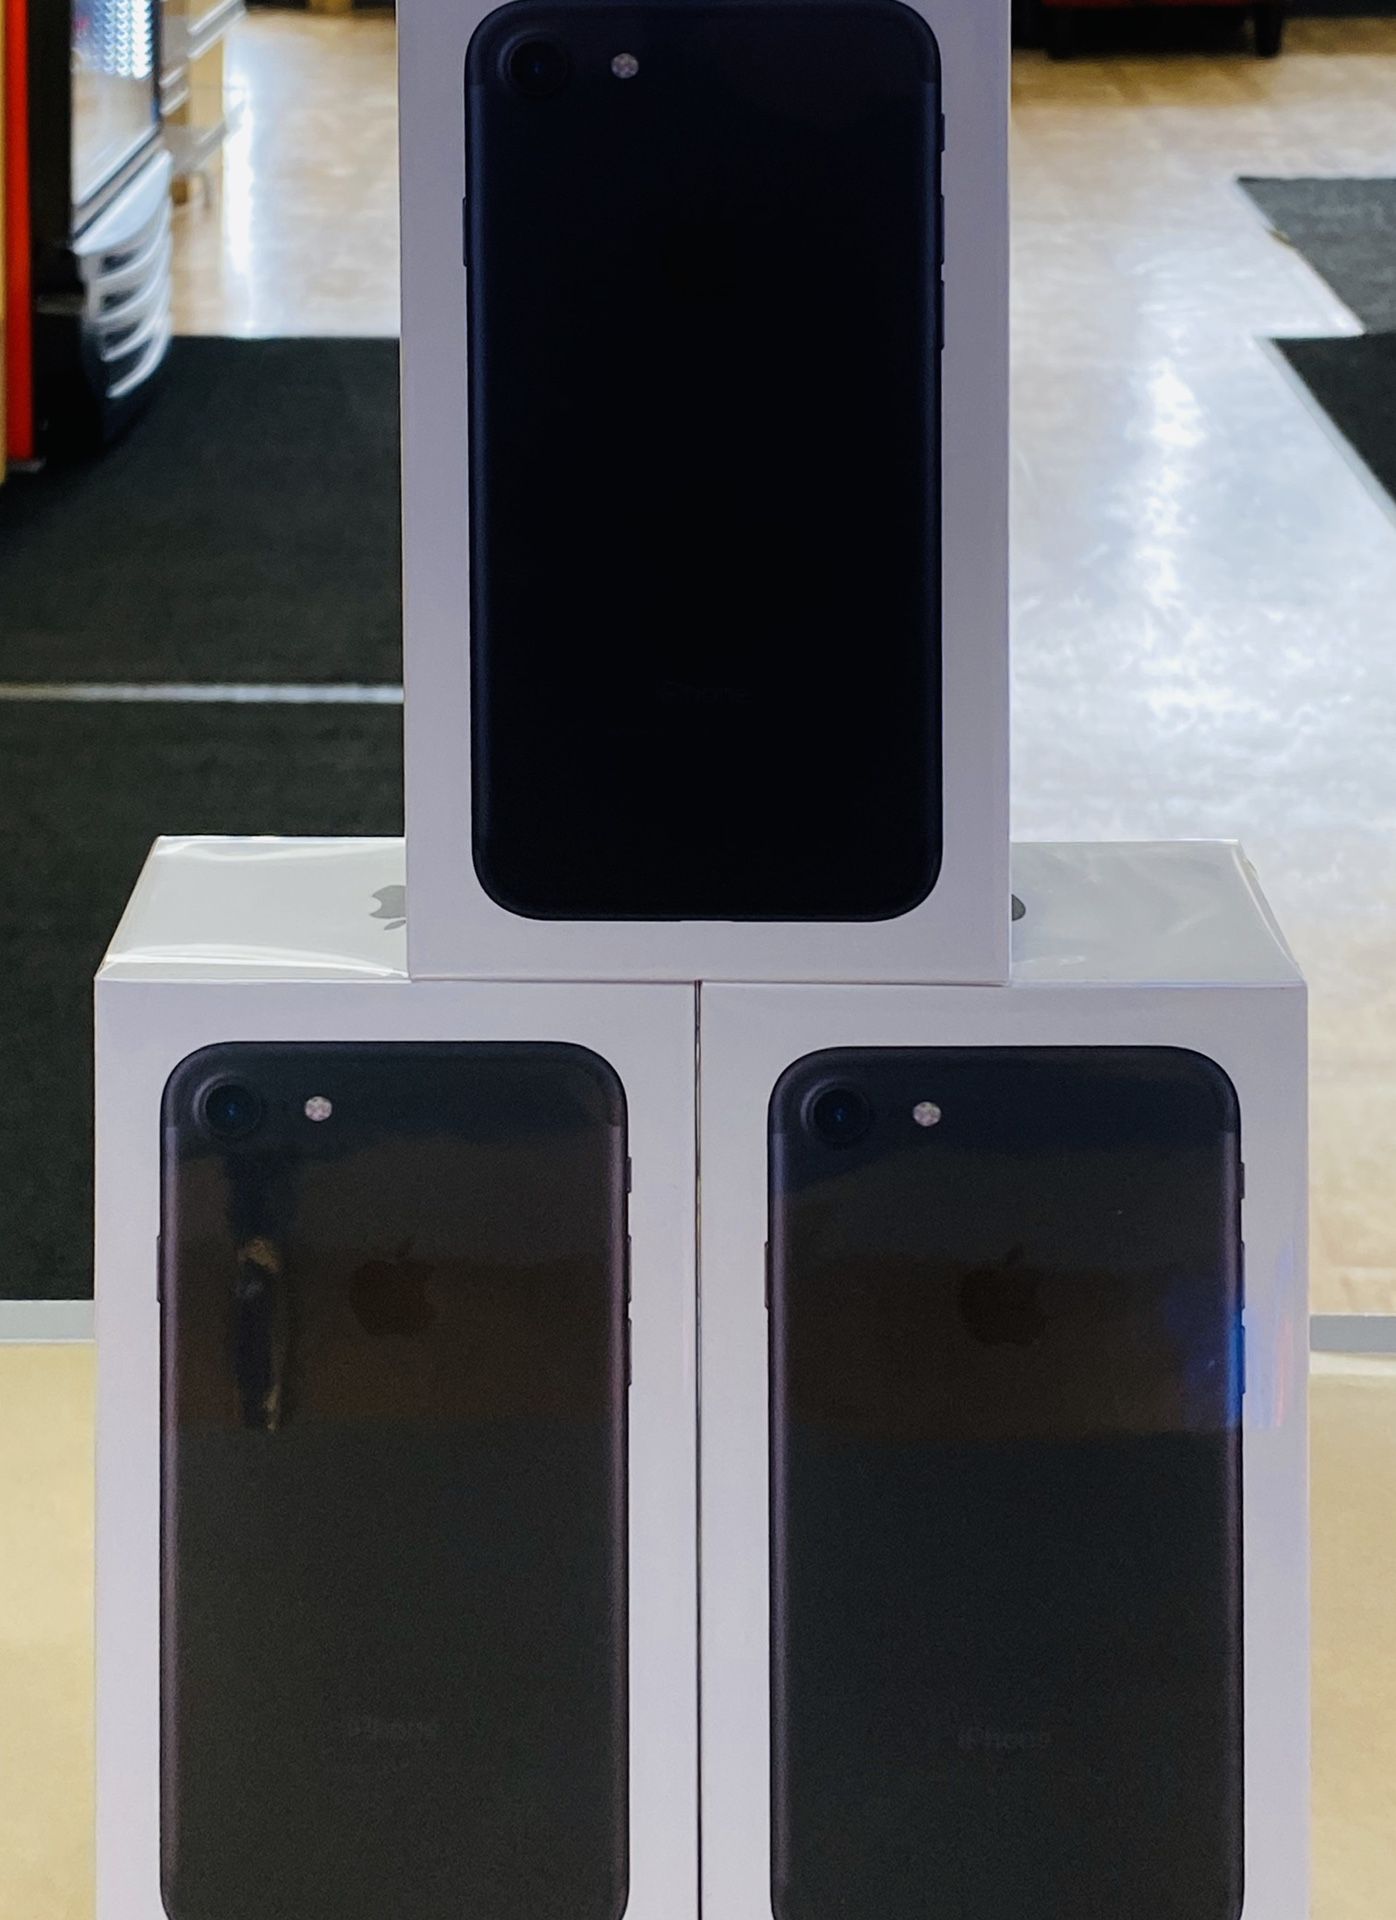 iPhone 7 32gb brand new in box for boost mobile,price includes phone first month of service and activation fee! This is only for new or port in custo